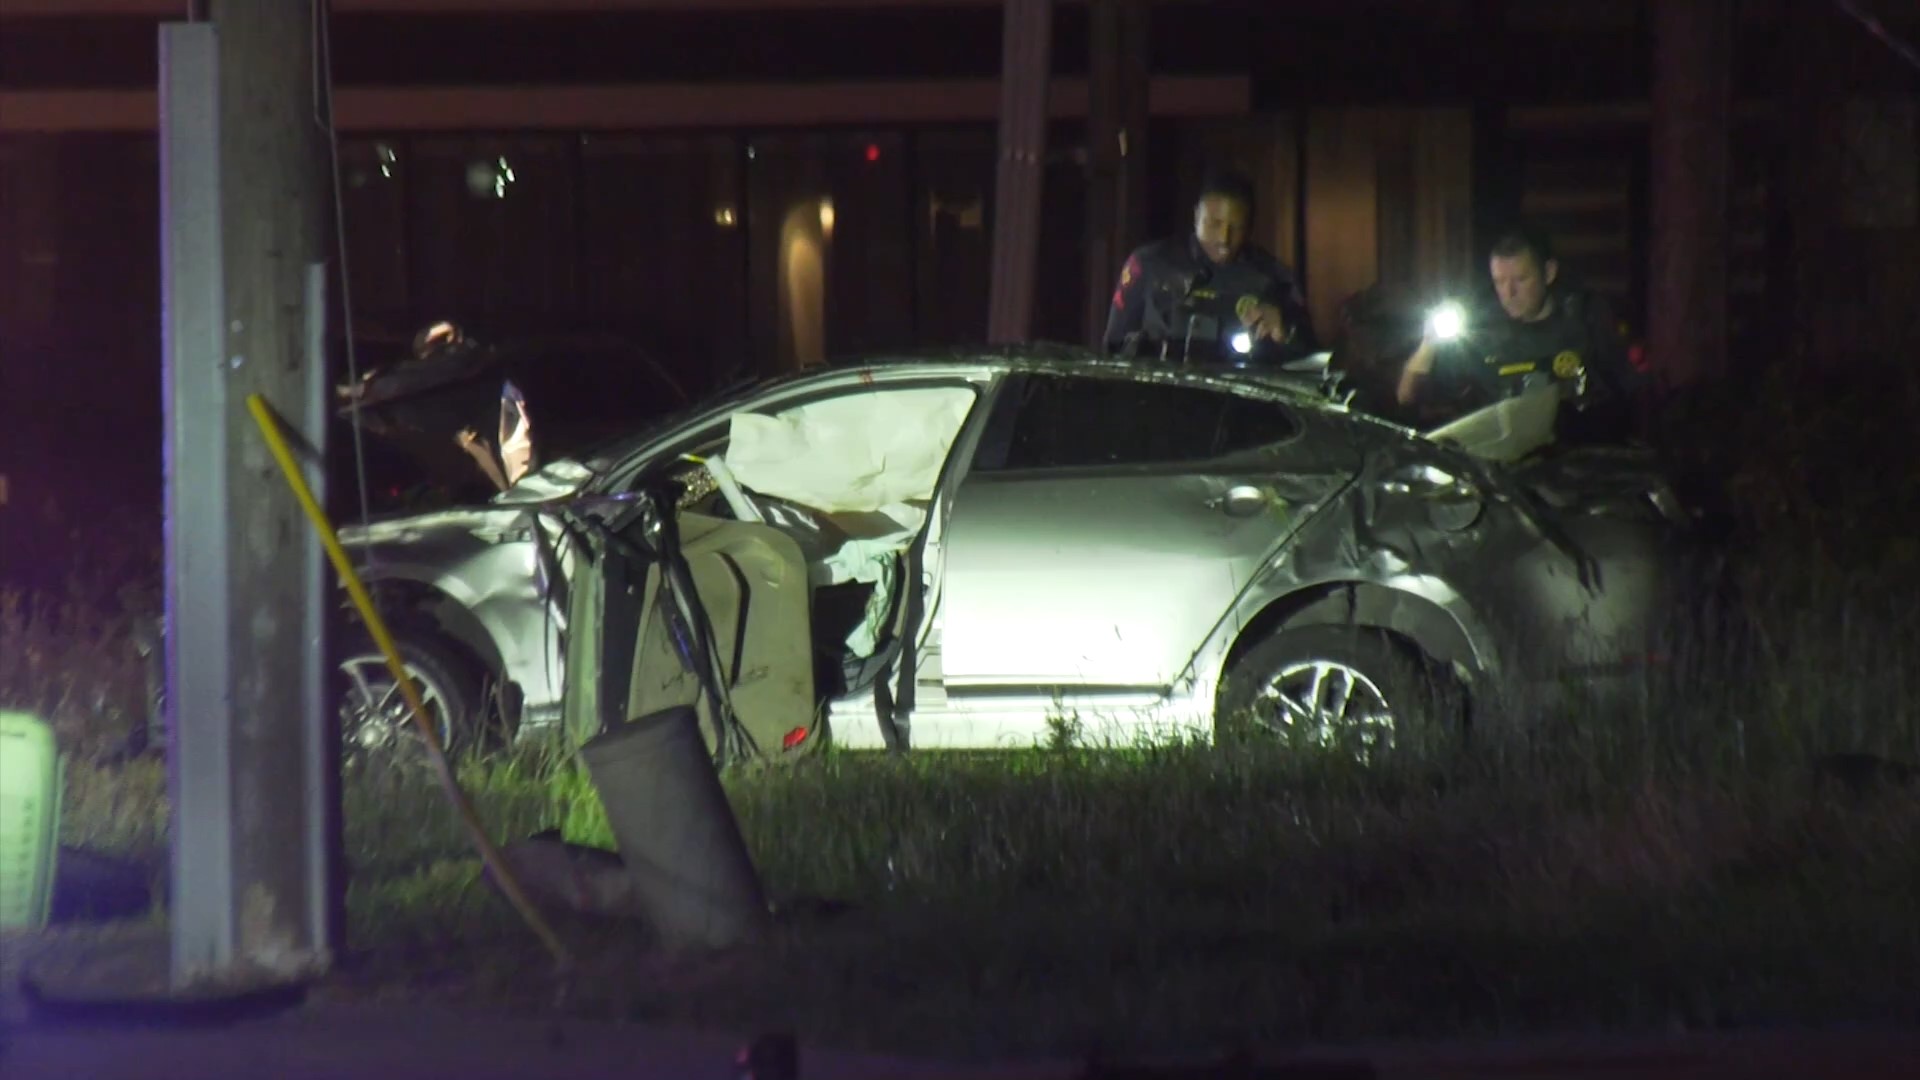 A chase with a stolen vehicle ended in a rollover crash when the car slammed into a pole on Highway 6 south of the Katy Freeway Wednesday morning.